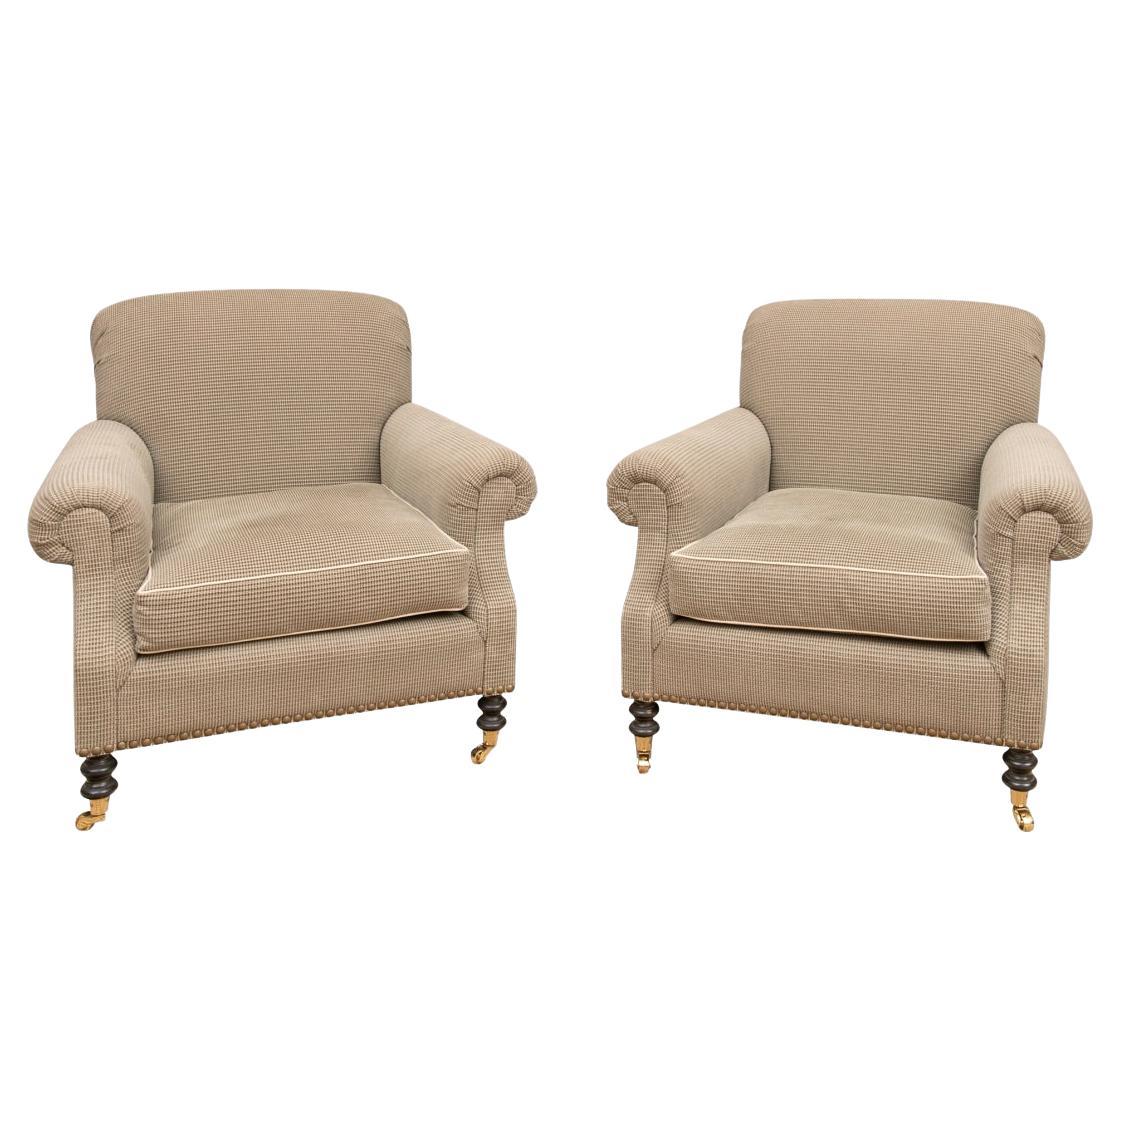 Pair of English Style Club Chairs